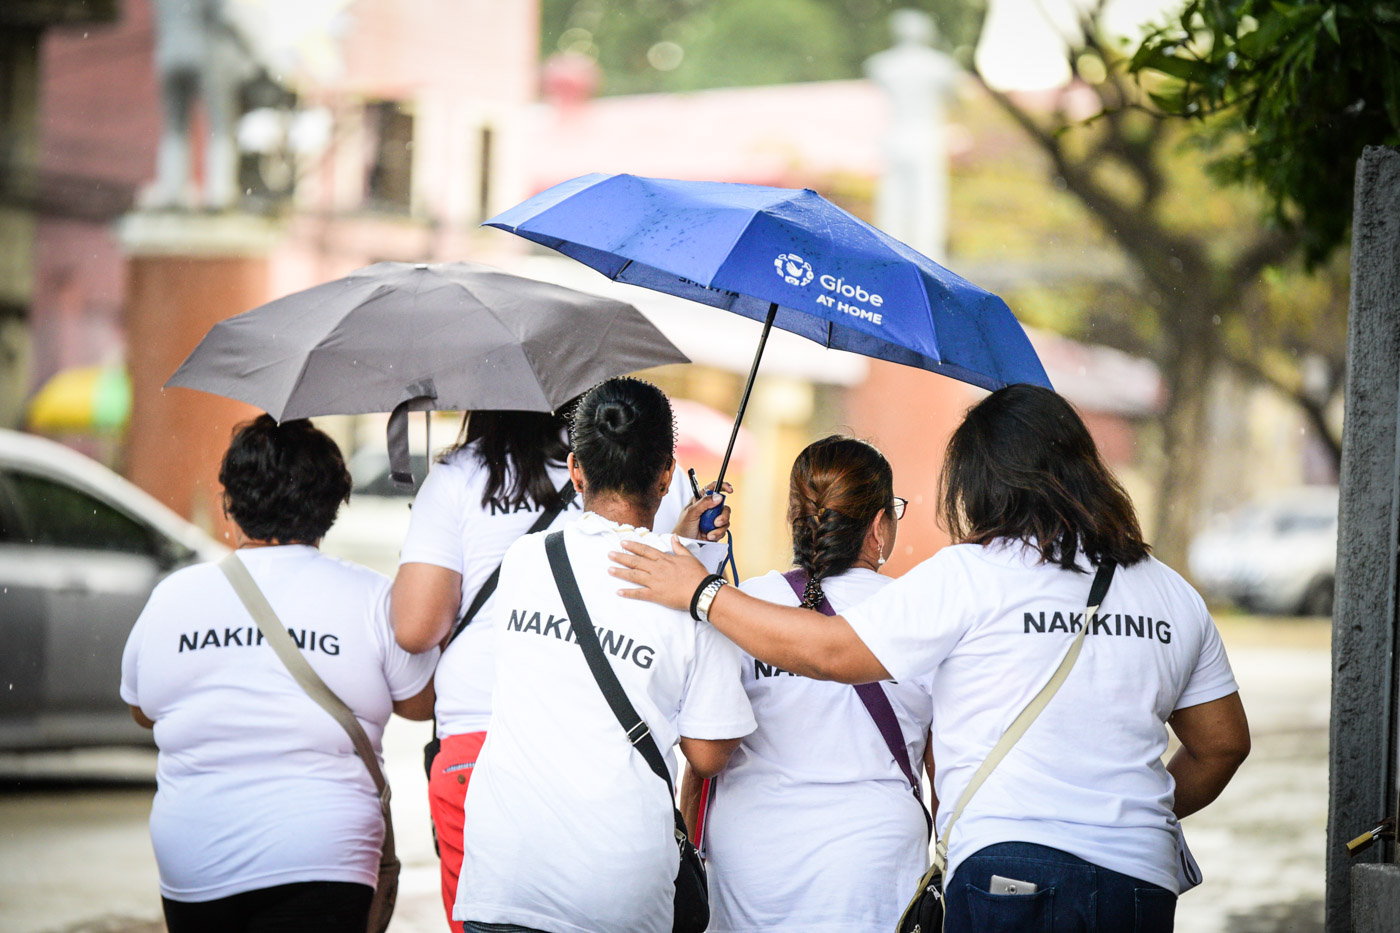 UNDETERRED. It drizzled for a while, but the Project Makinig volunteers still finished their door-to-door task in Marikina City. Photo by Alecs Ongcal/Rappler  